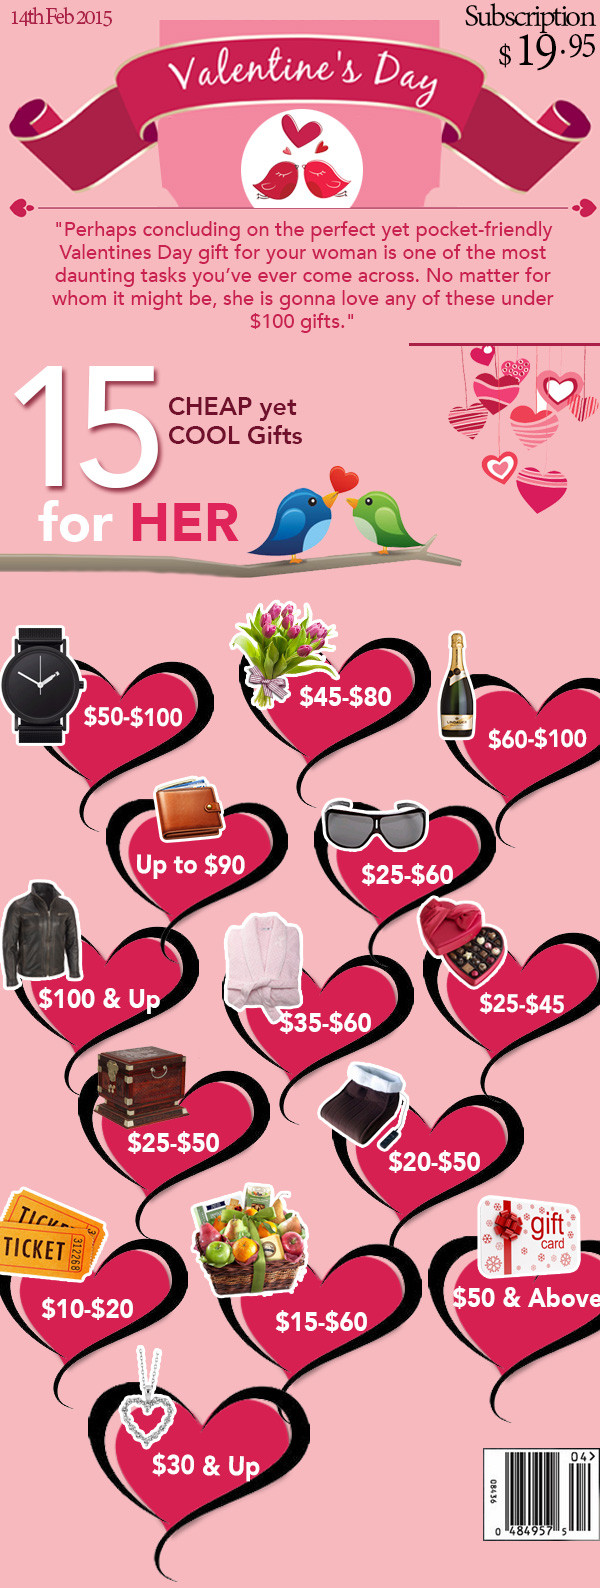 Cheap Valentines Day Gifts For Her
 15 Cheap yet Cool Gifts for Her this Valentines Day OVLG